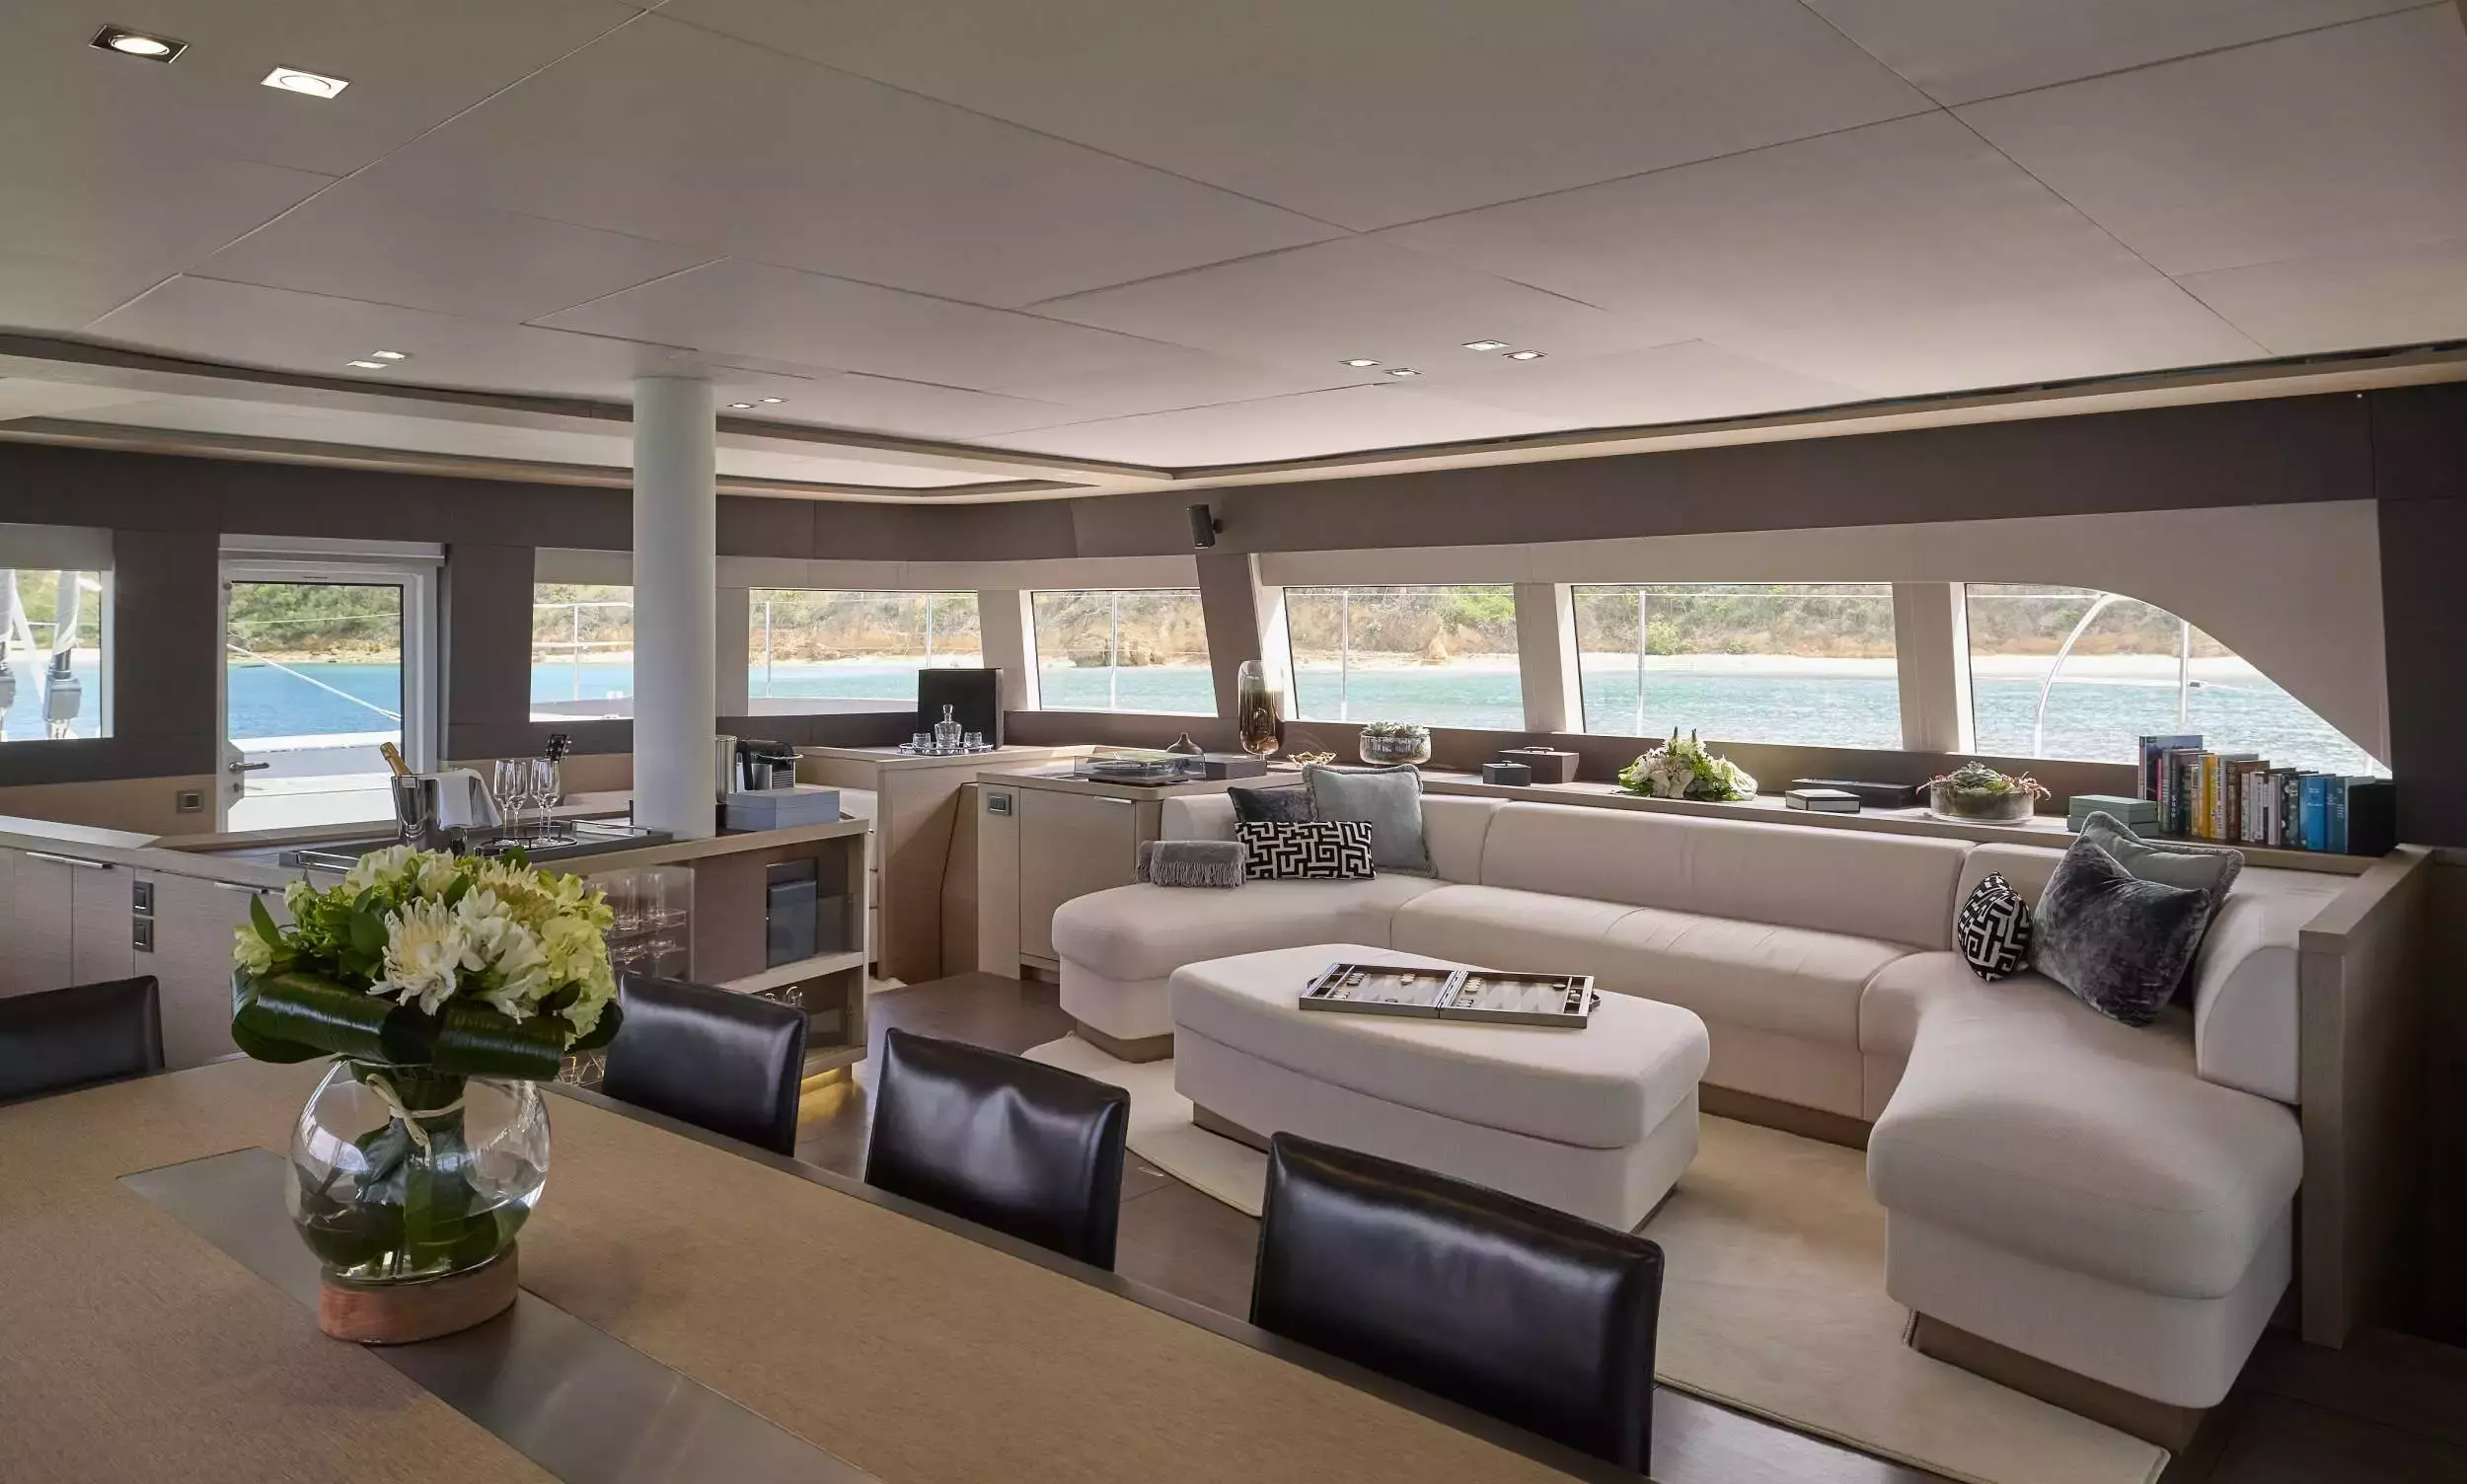 La Gatta by CNB Bordeaux - Top rates for a Charter of a private Luxury Catamaran in French Polynesia